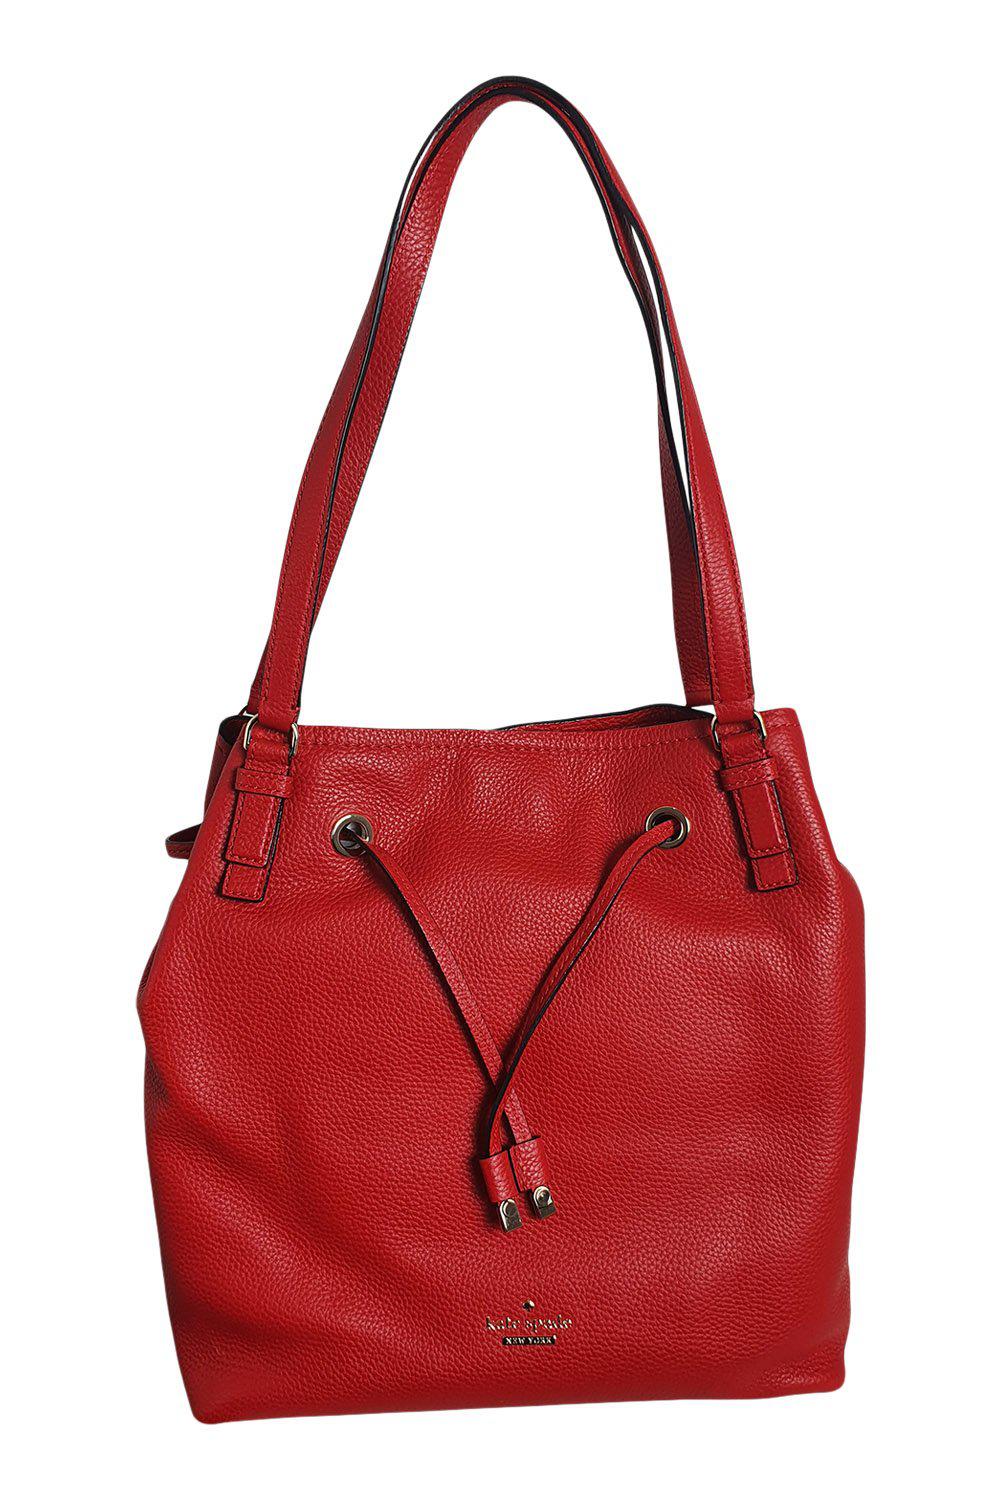 KATE SPADE Cherry Red Leather Medium Bucket Bag (M)-The Freperie